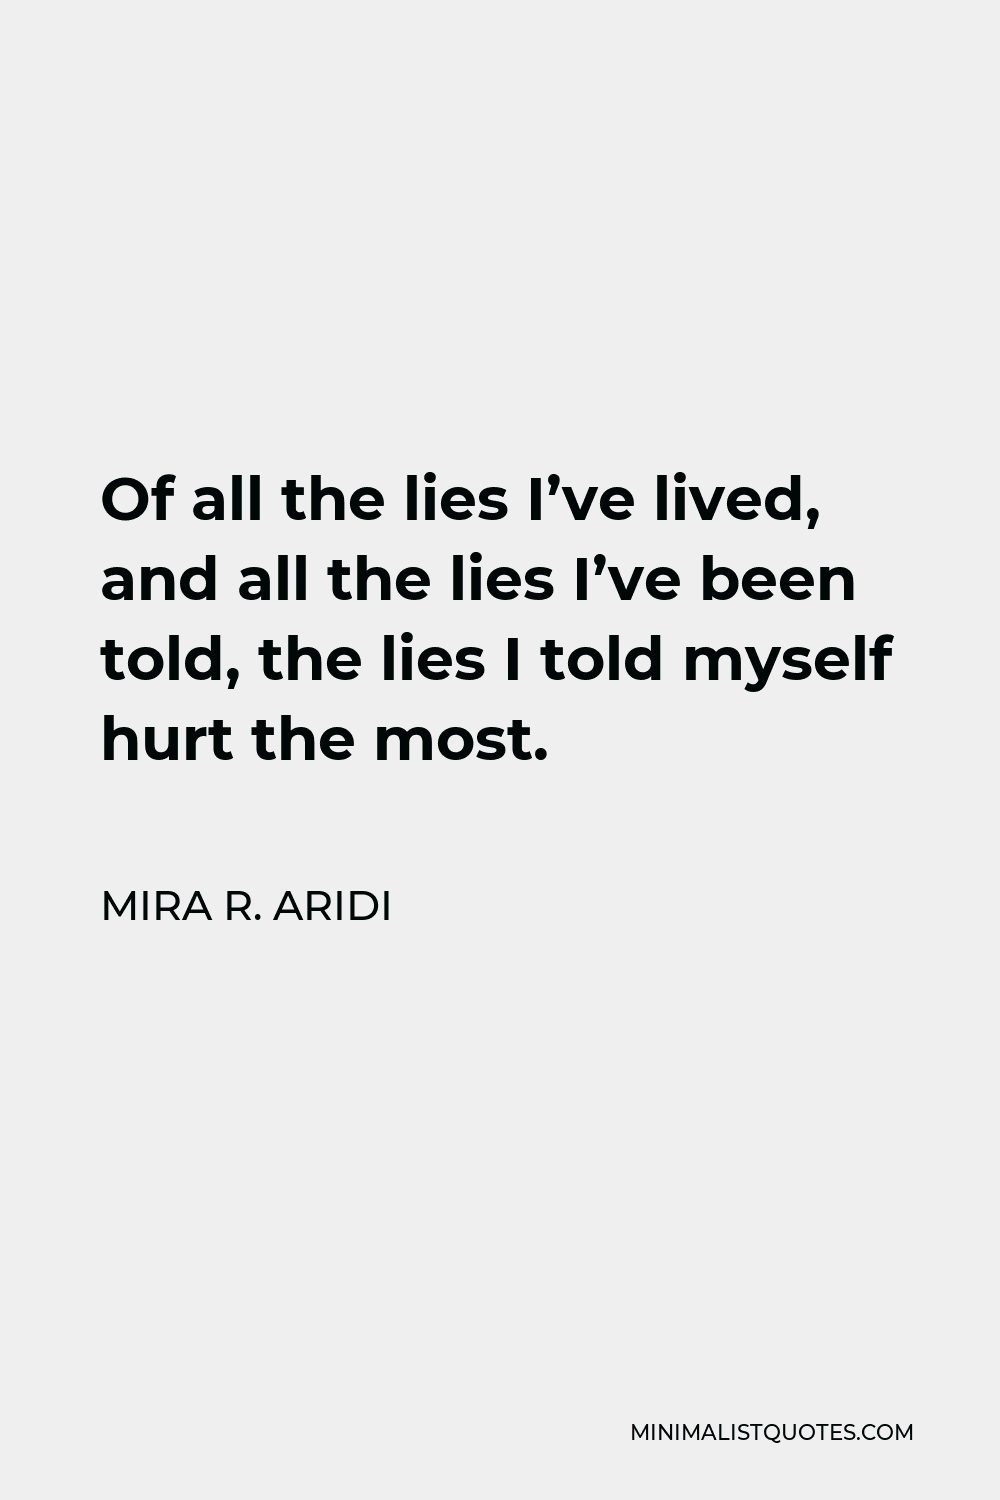 Mira R. Aridi Quote - Of all the lies I’ve lived, and all the lies I’ve been told, the lies I told myself hurt the most.